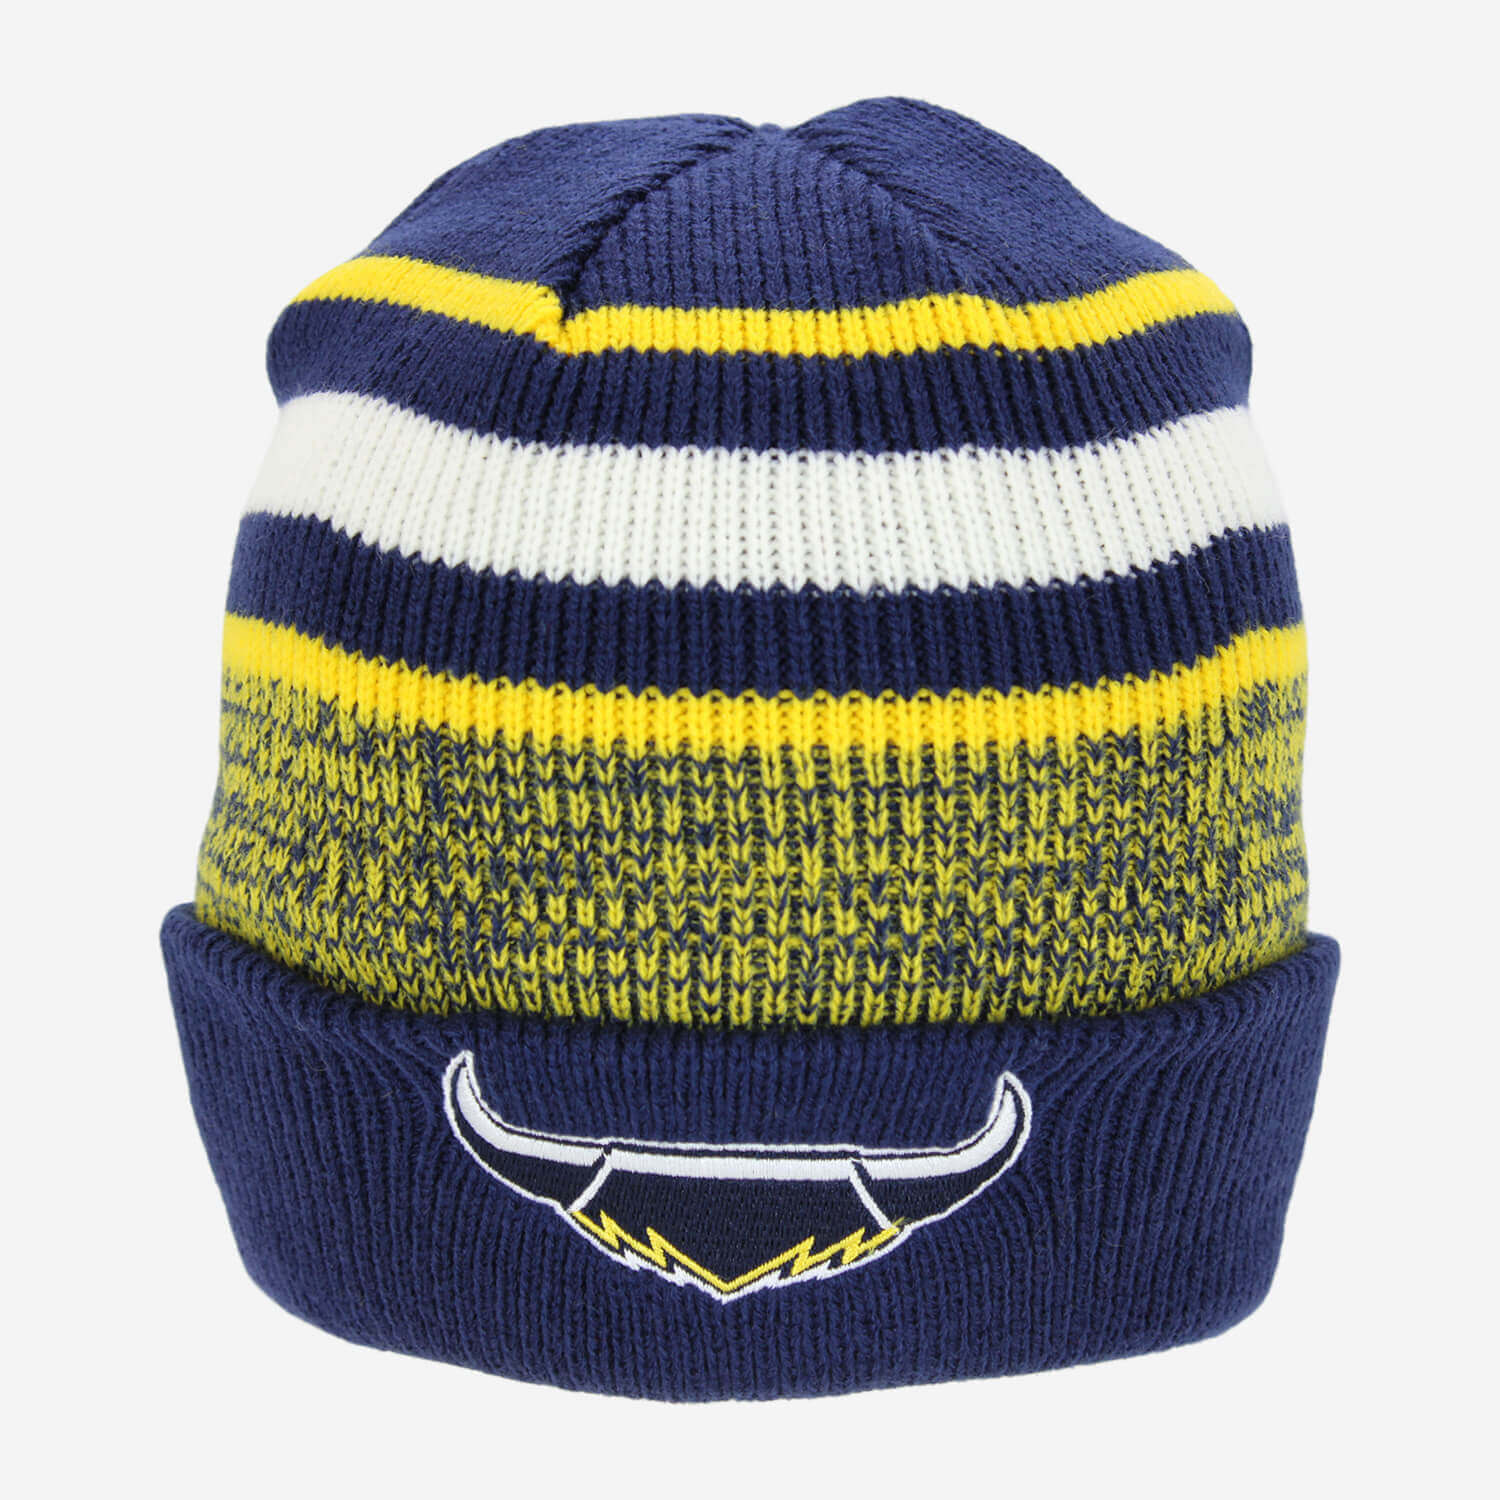 NEW QUEENSLAND COWBOYS NRL CLUSTER BEANIE_NEW QUEENSLAND COWBOYS_STUBBY CLUB